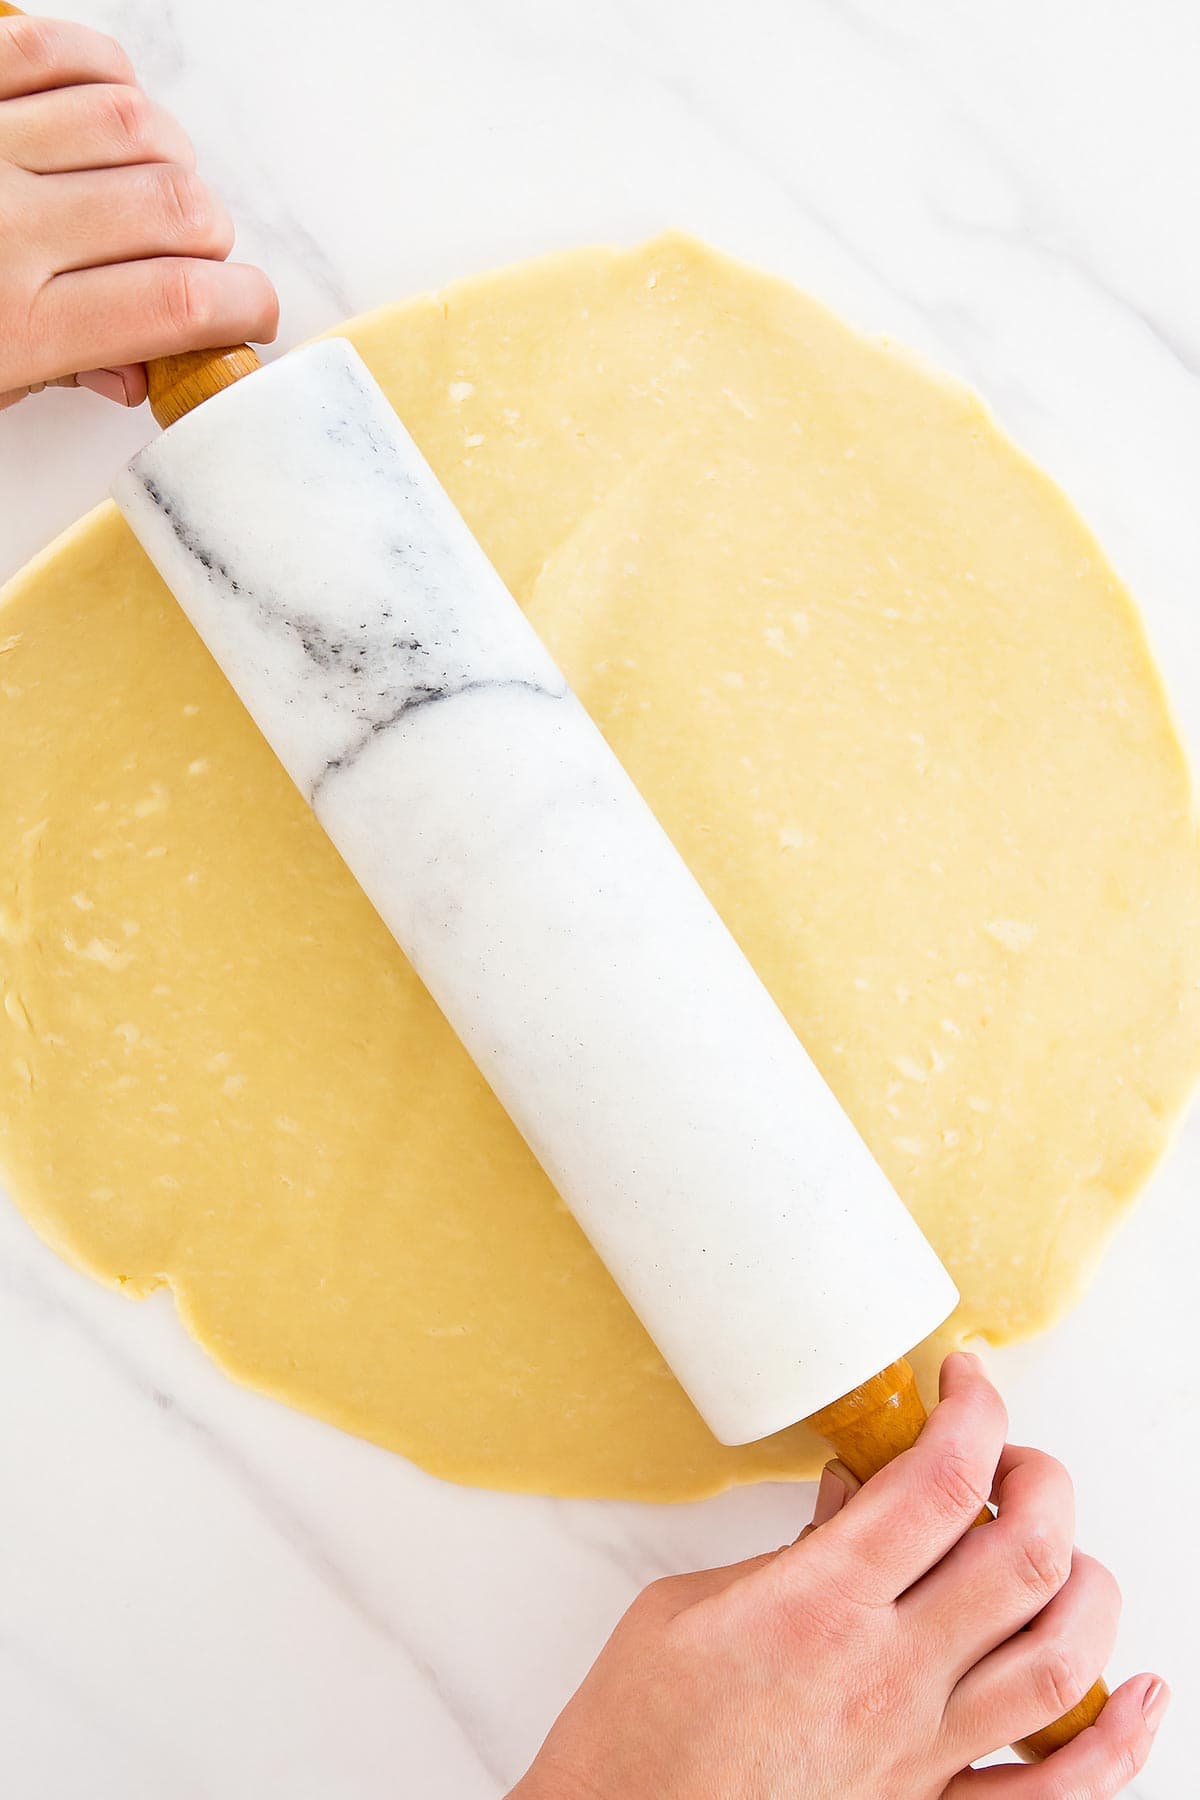 Marble rolling pin rolling out flaky pie dough